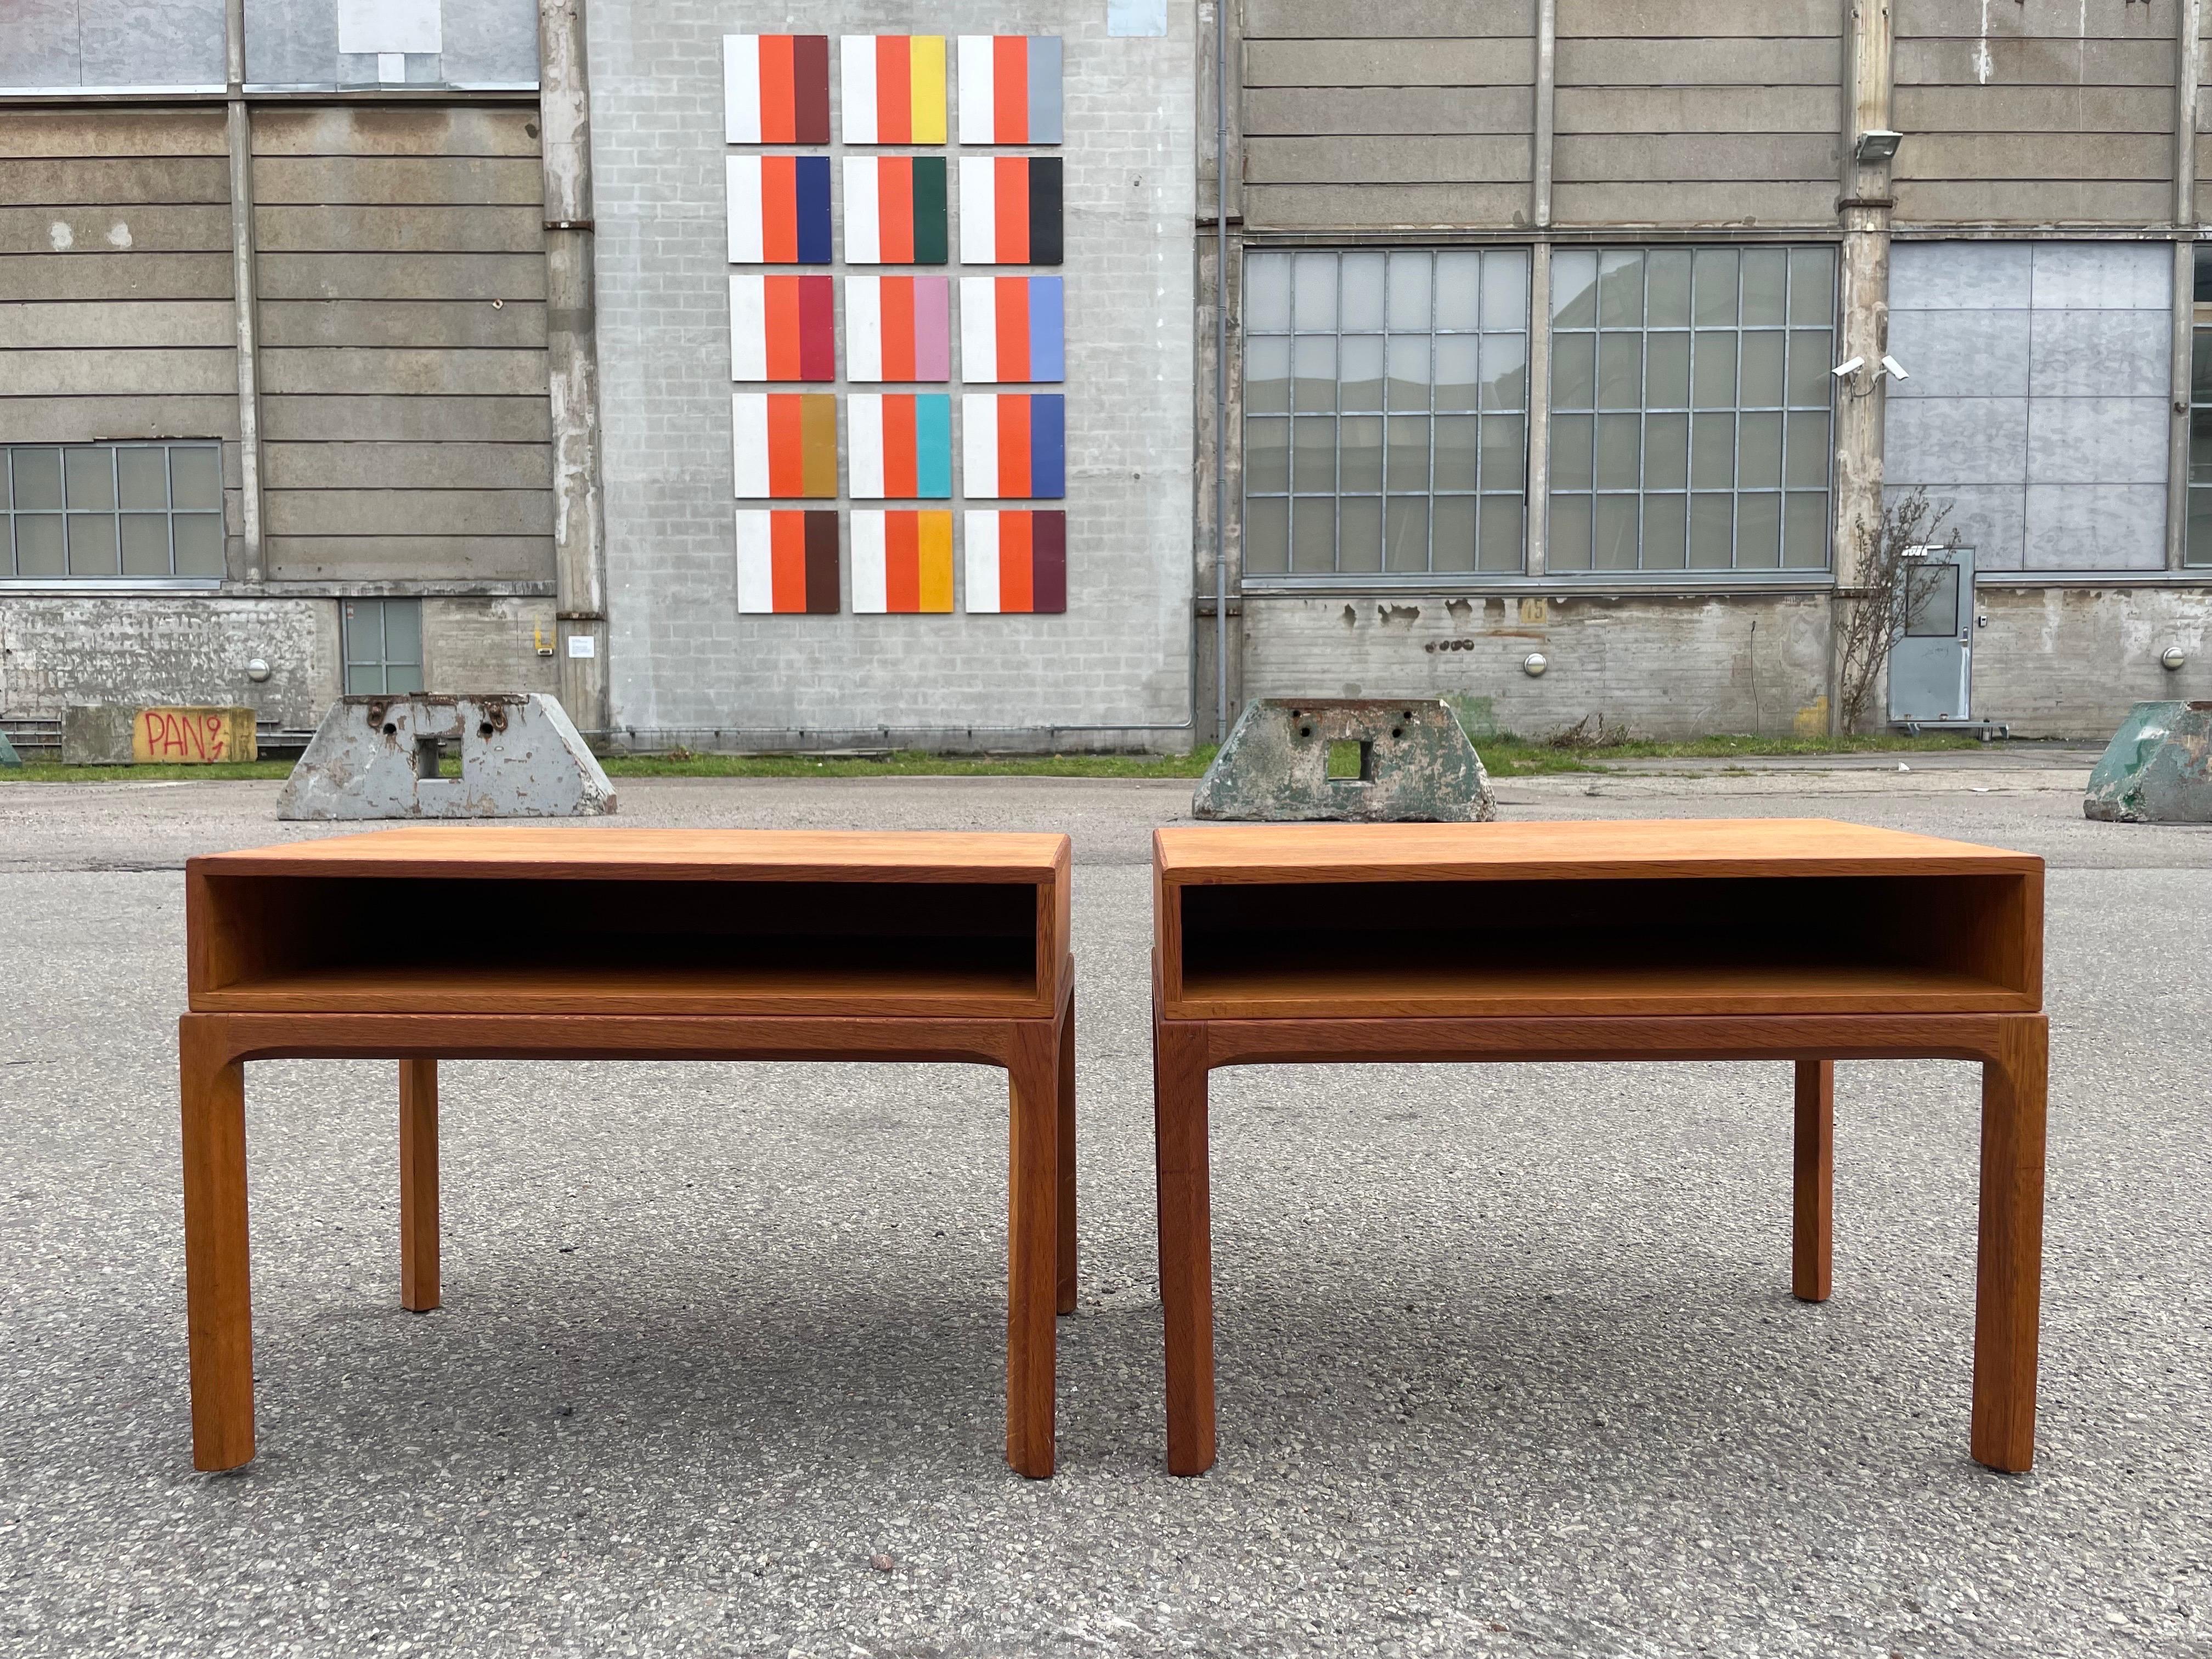 A stunning pair of vintage night stands designed by the legendary Kai Kristiansen and expertly crafted by Aksel Kjersgaard for Odder in the 1960s. These timeless pieces are a testament to mid-century Scandinavian design and are as relevant today as